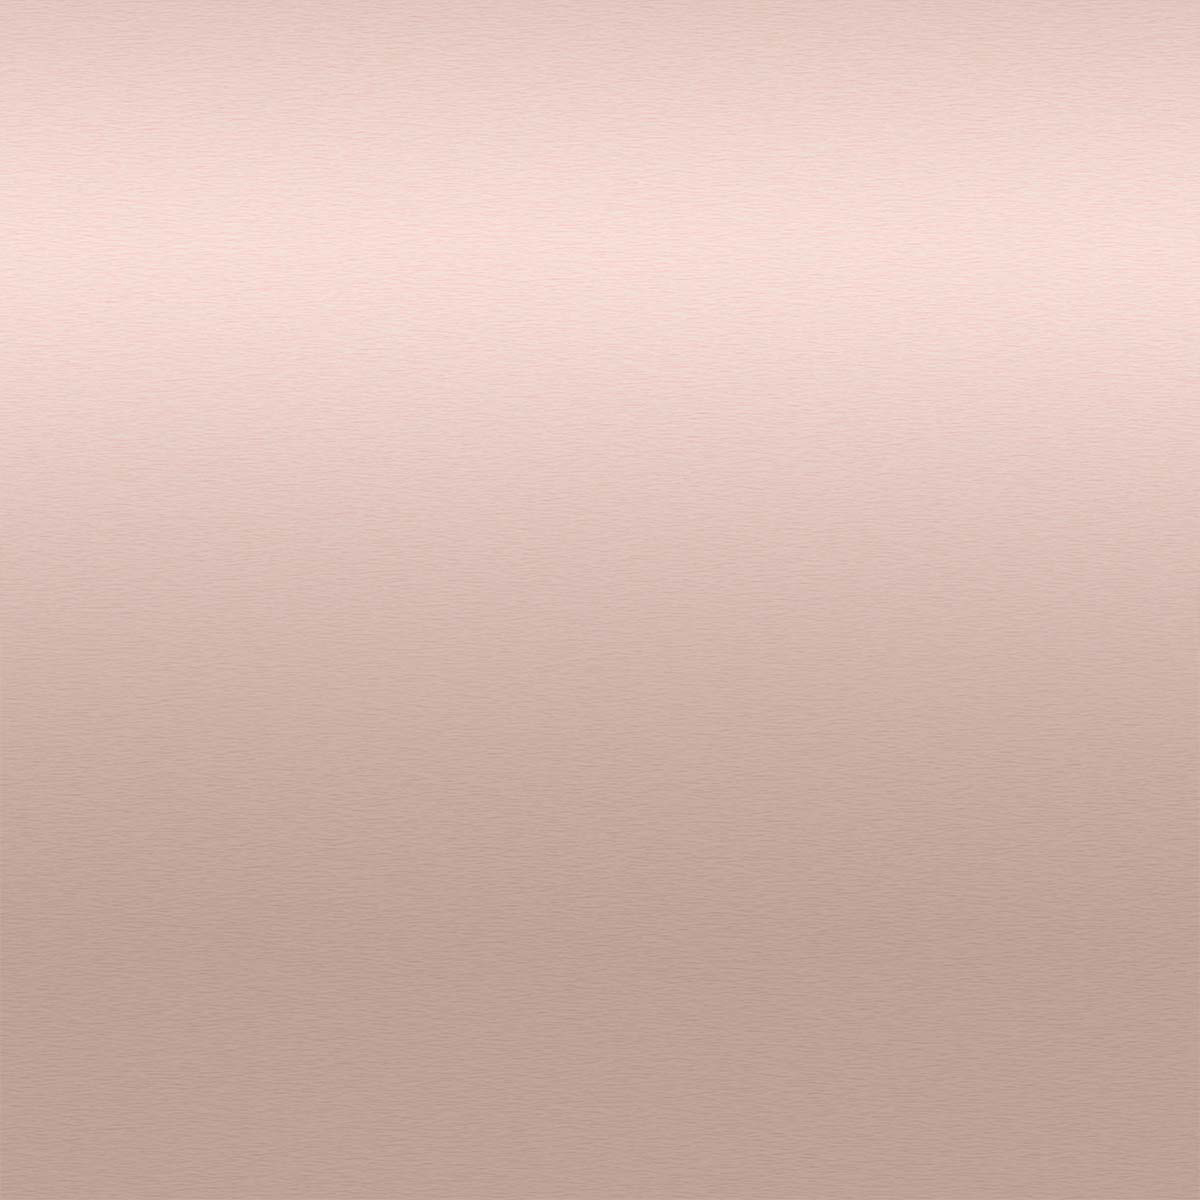 Rose Gold Color / Dark Rose Gold Color Hex Code Is 9c626a : The shade